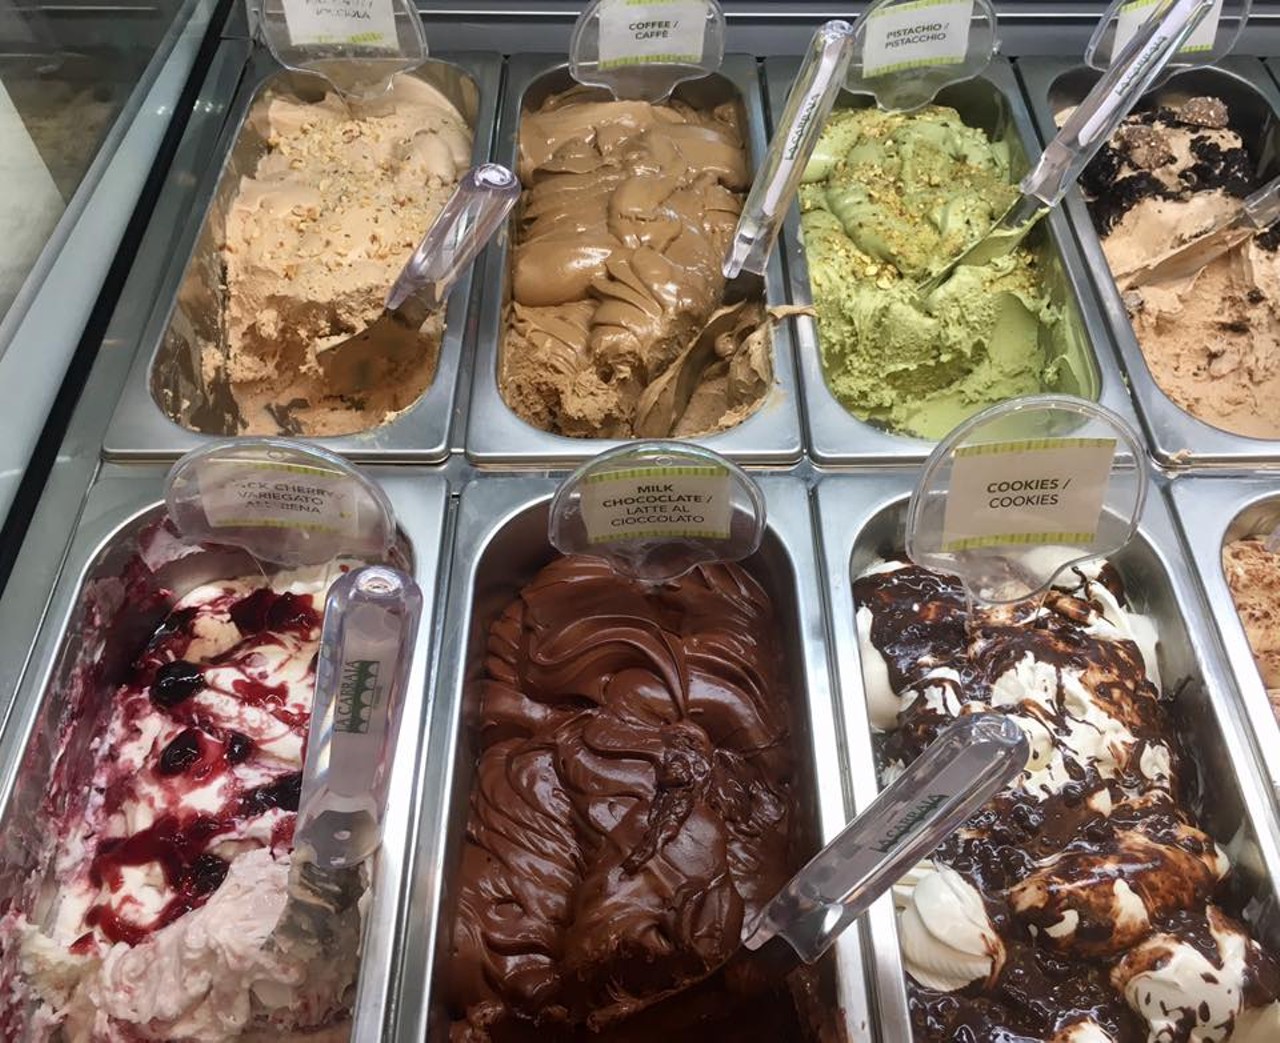 Gelato La Carraia
The Marketplace at Dr. Phillips, 7600 Dr. Phillips Blvd., 407-203-2880 
Italian gelateria La Carraia decided to bring their 25-year-old delicious recipe for frozen treats to Orlando. If you want authentic gelato, La Carraia is the place to go. 
Photo via La Carraia Florida/Facebook